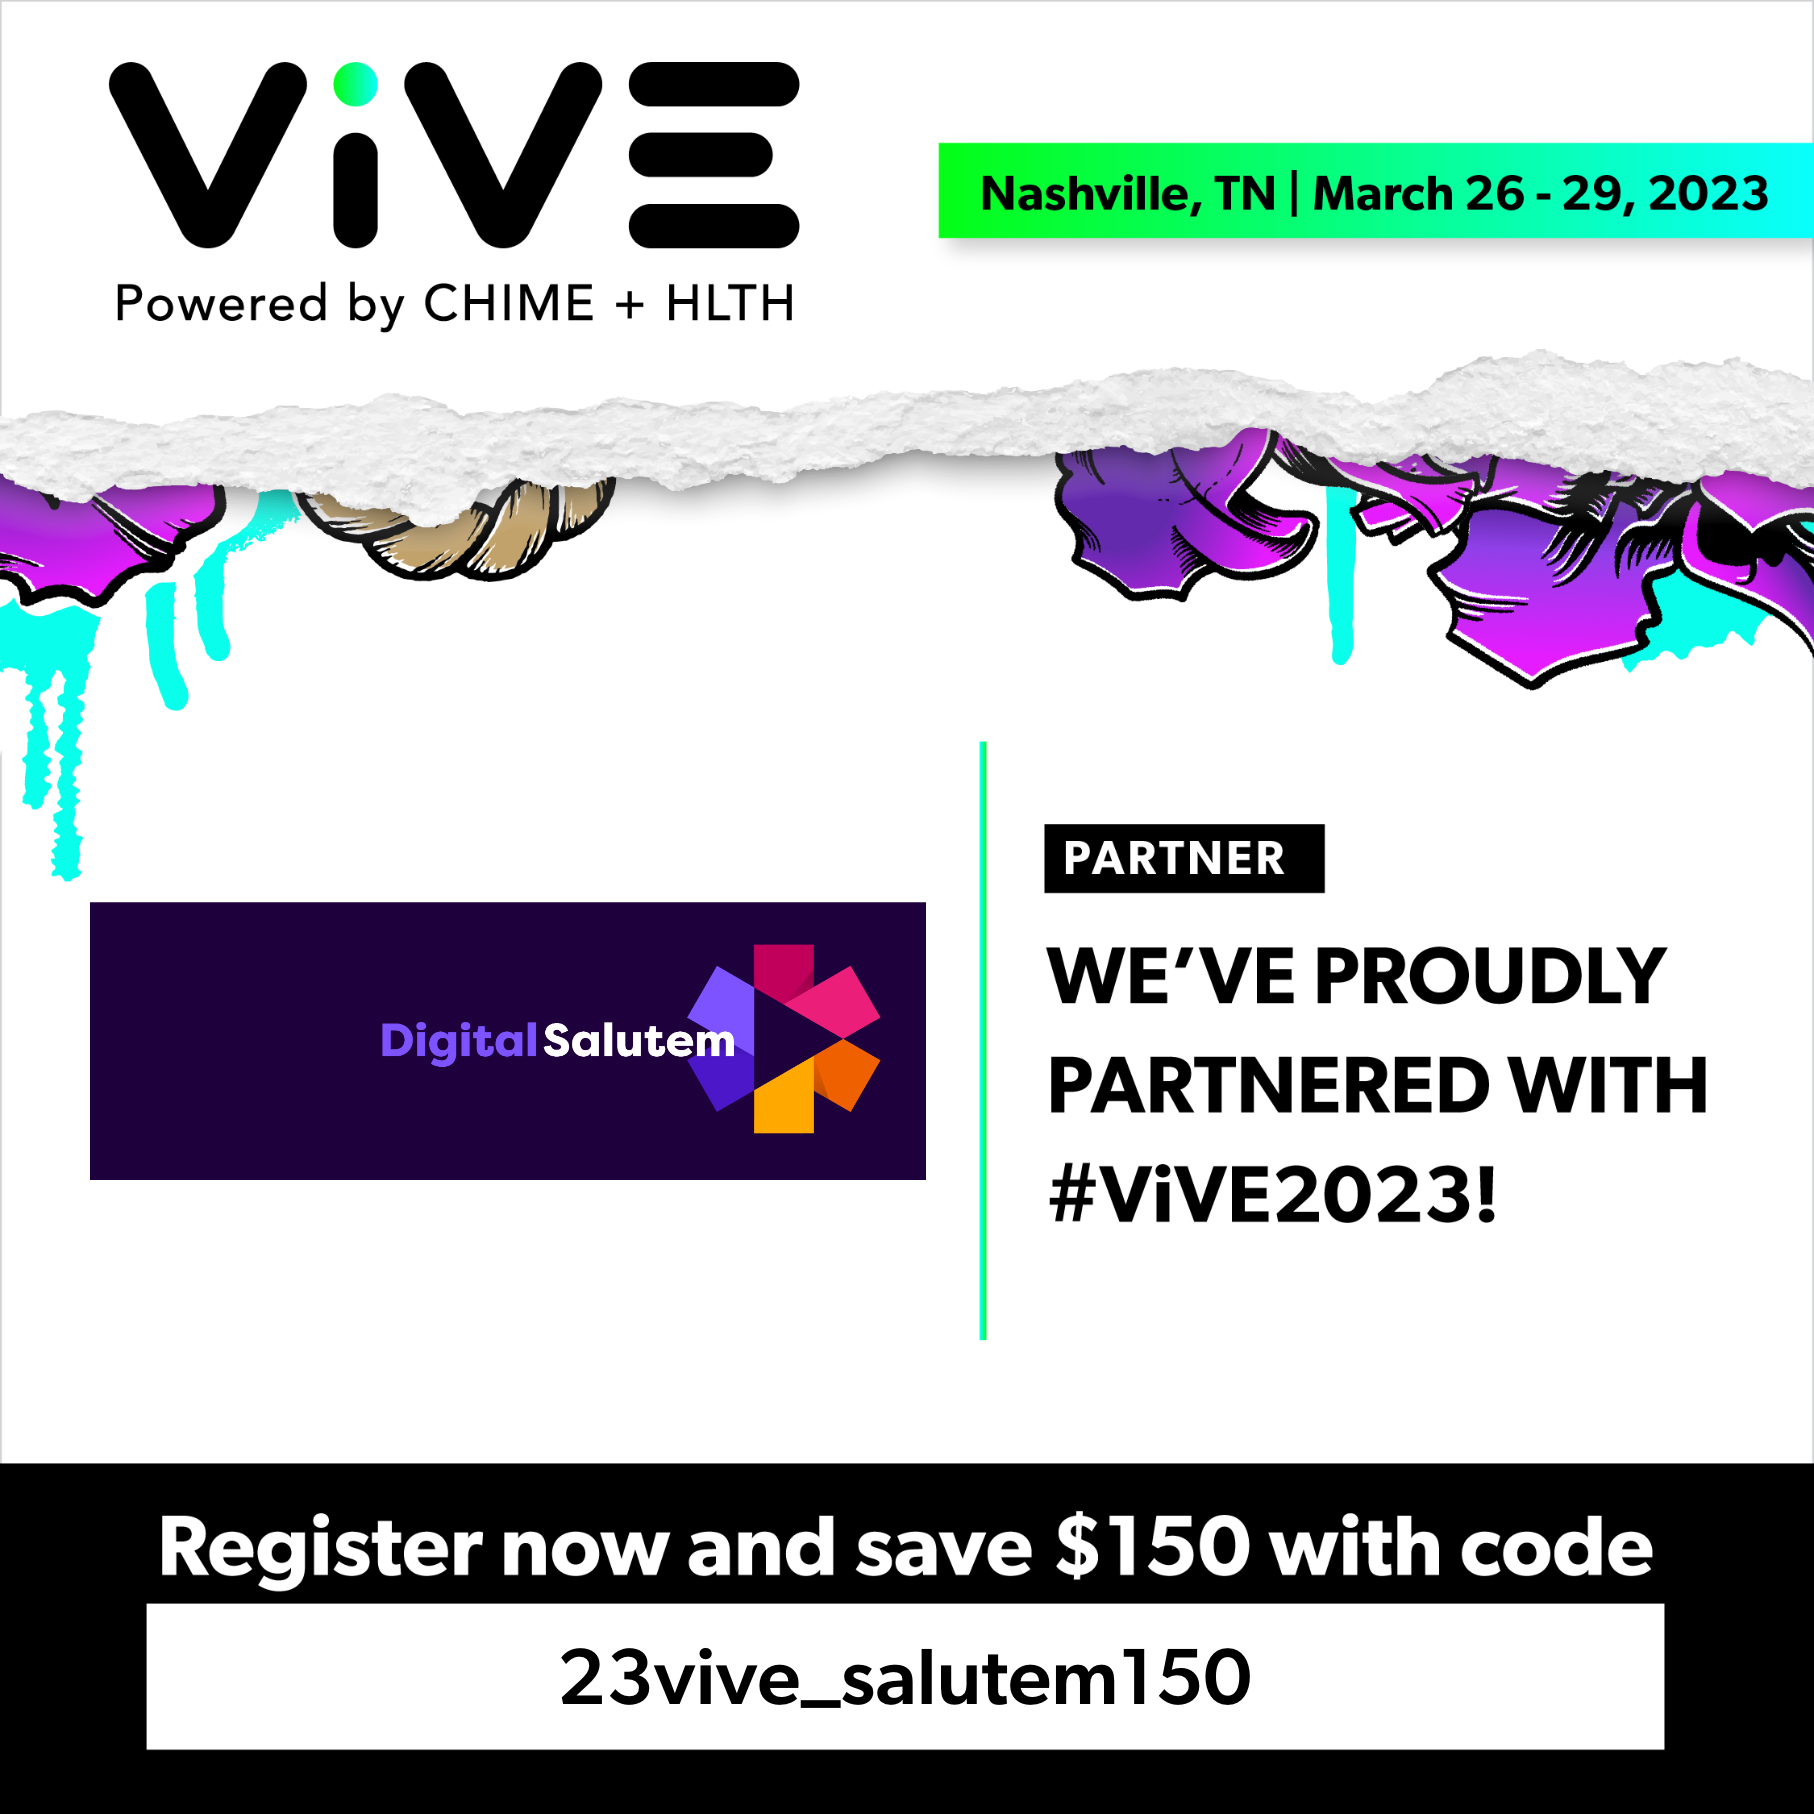 Partnership with ViVE